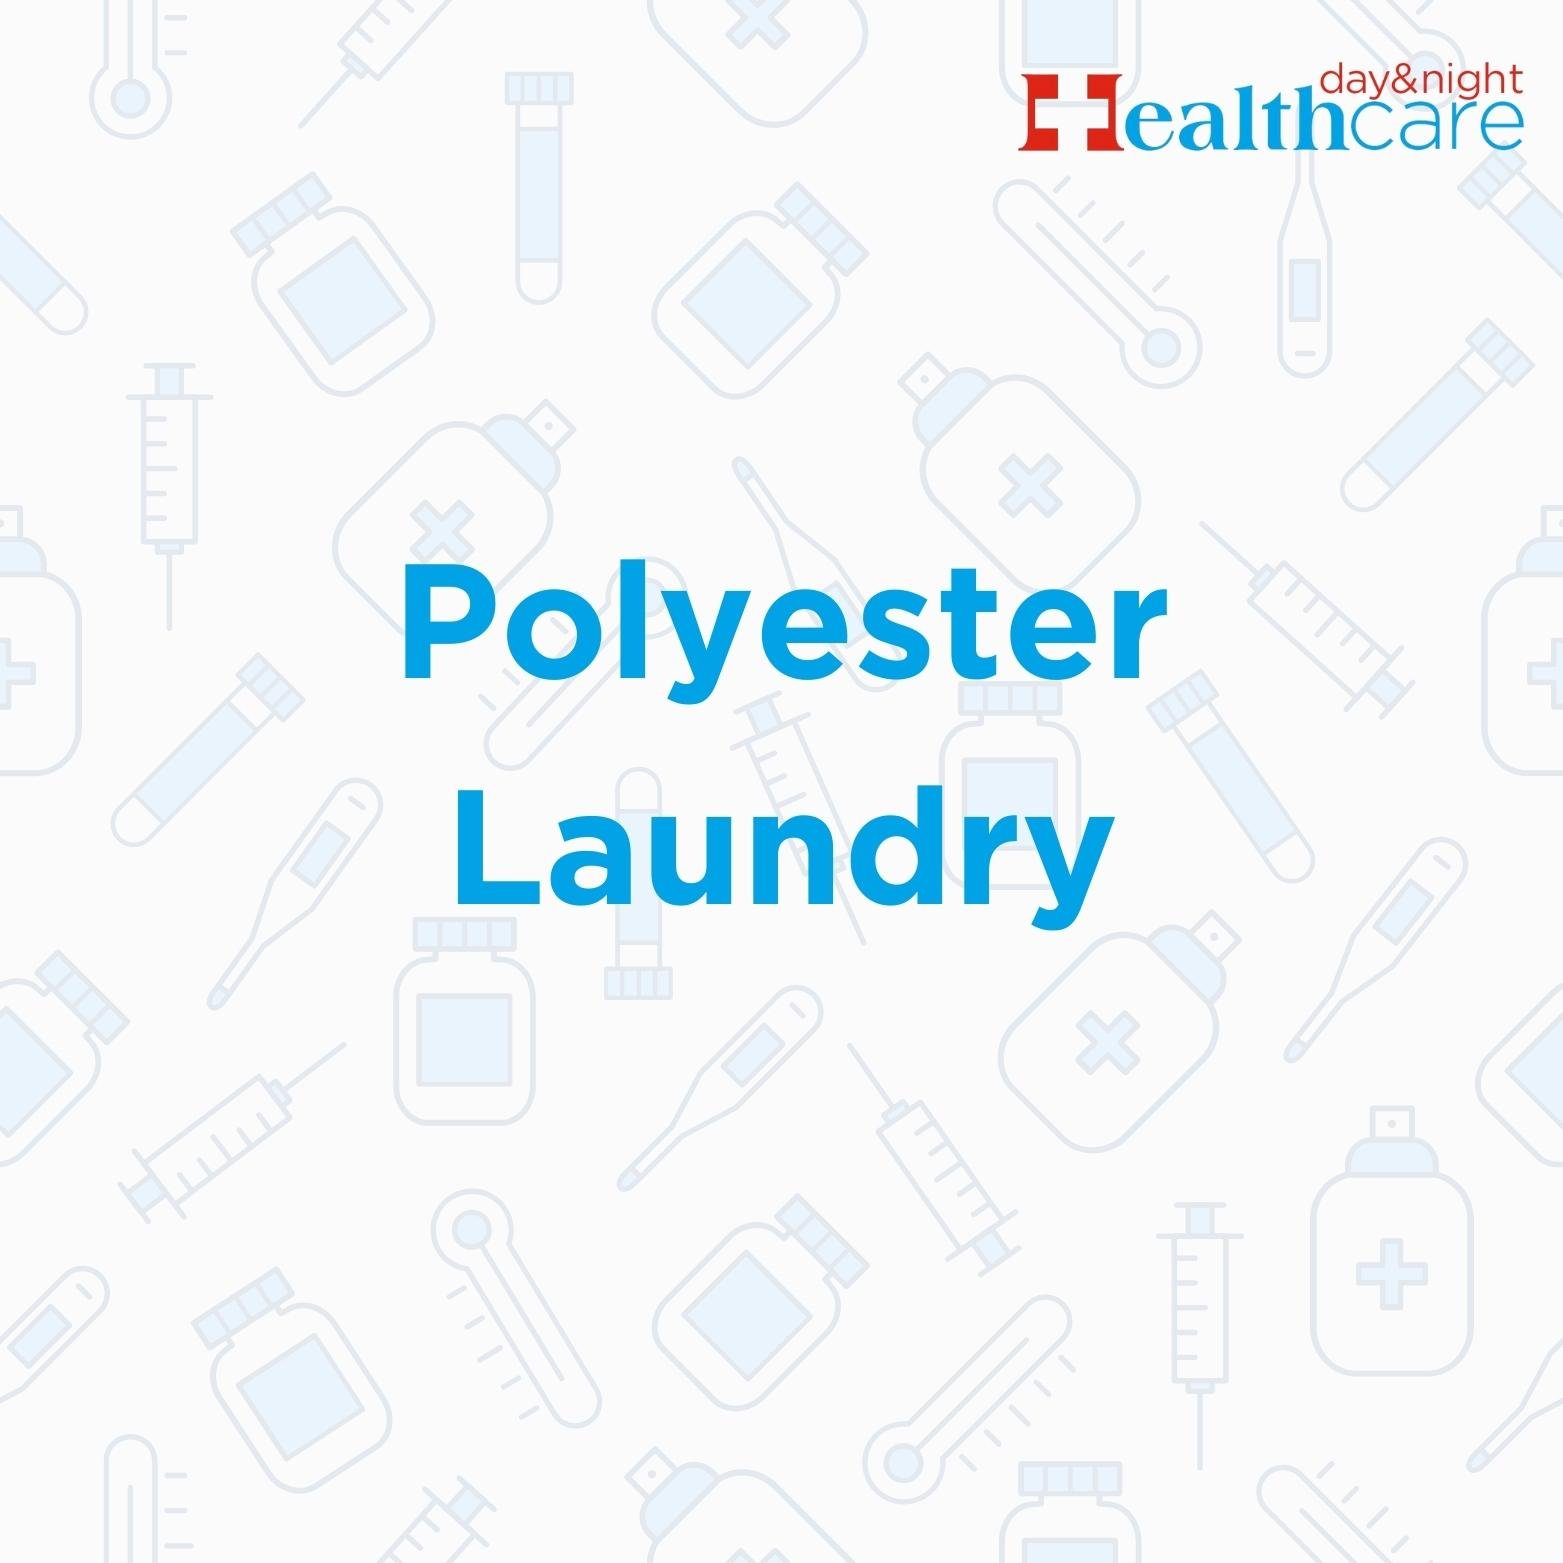 Polyester Laundry